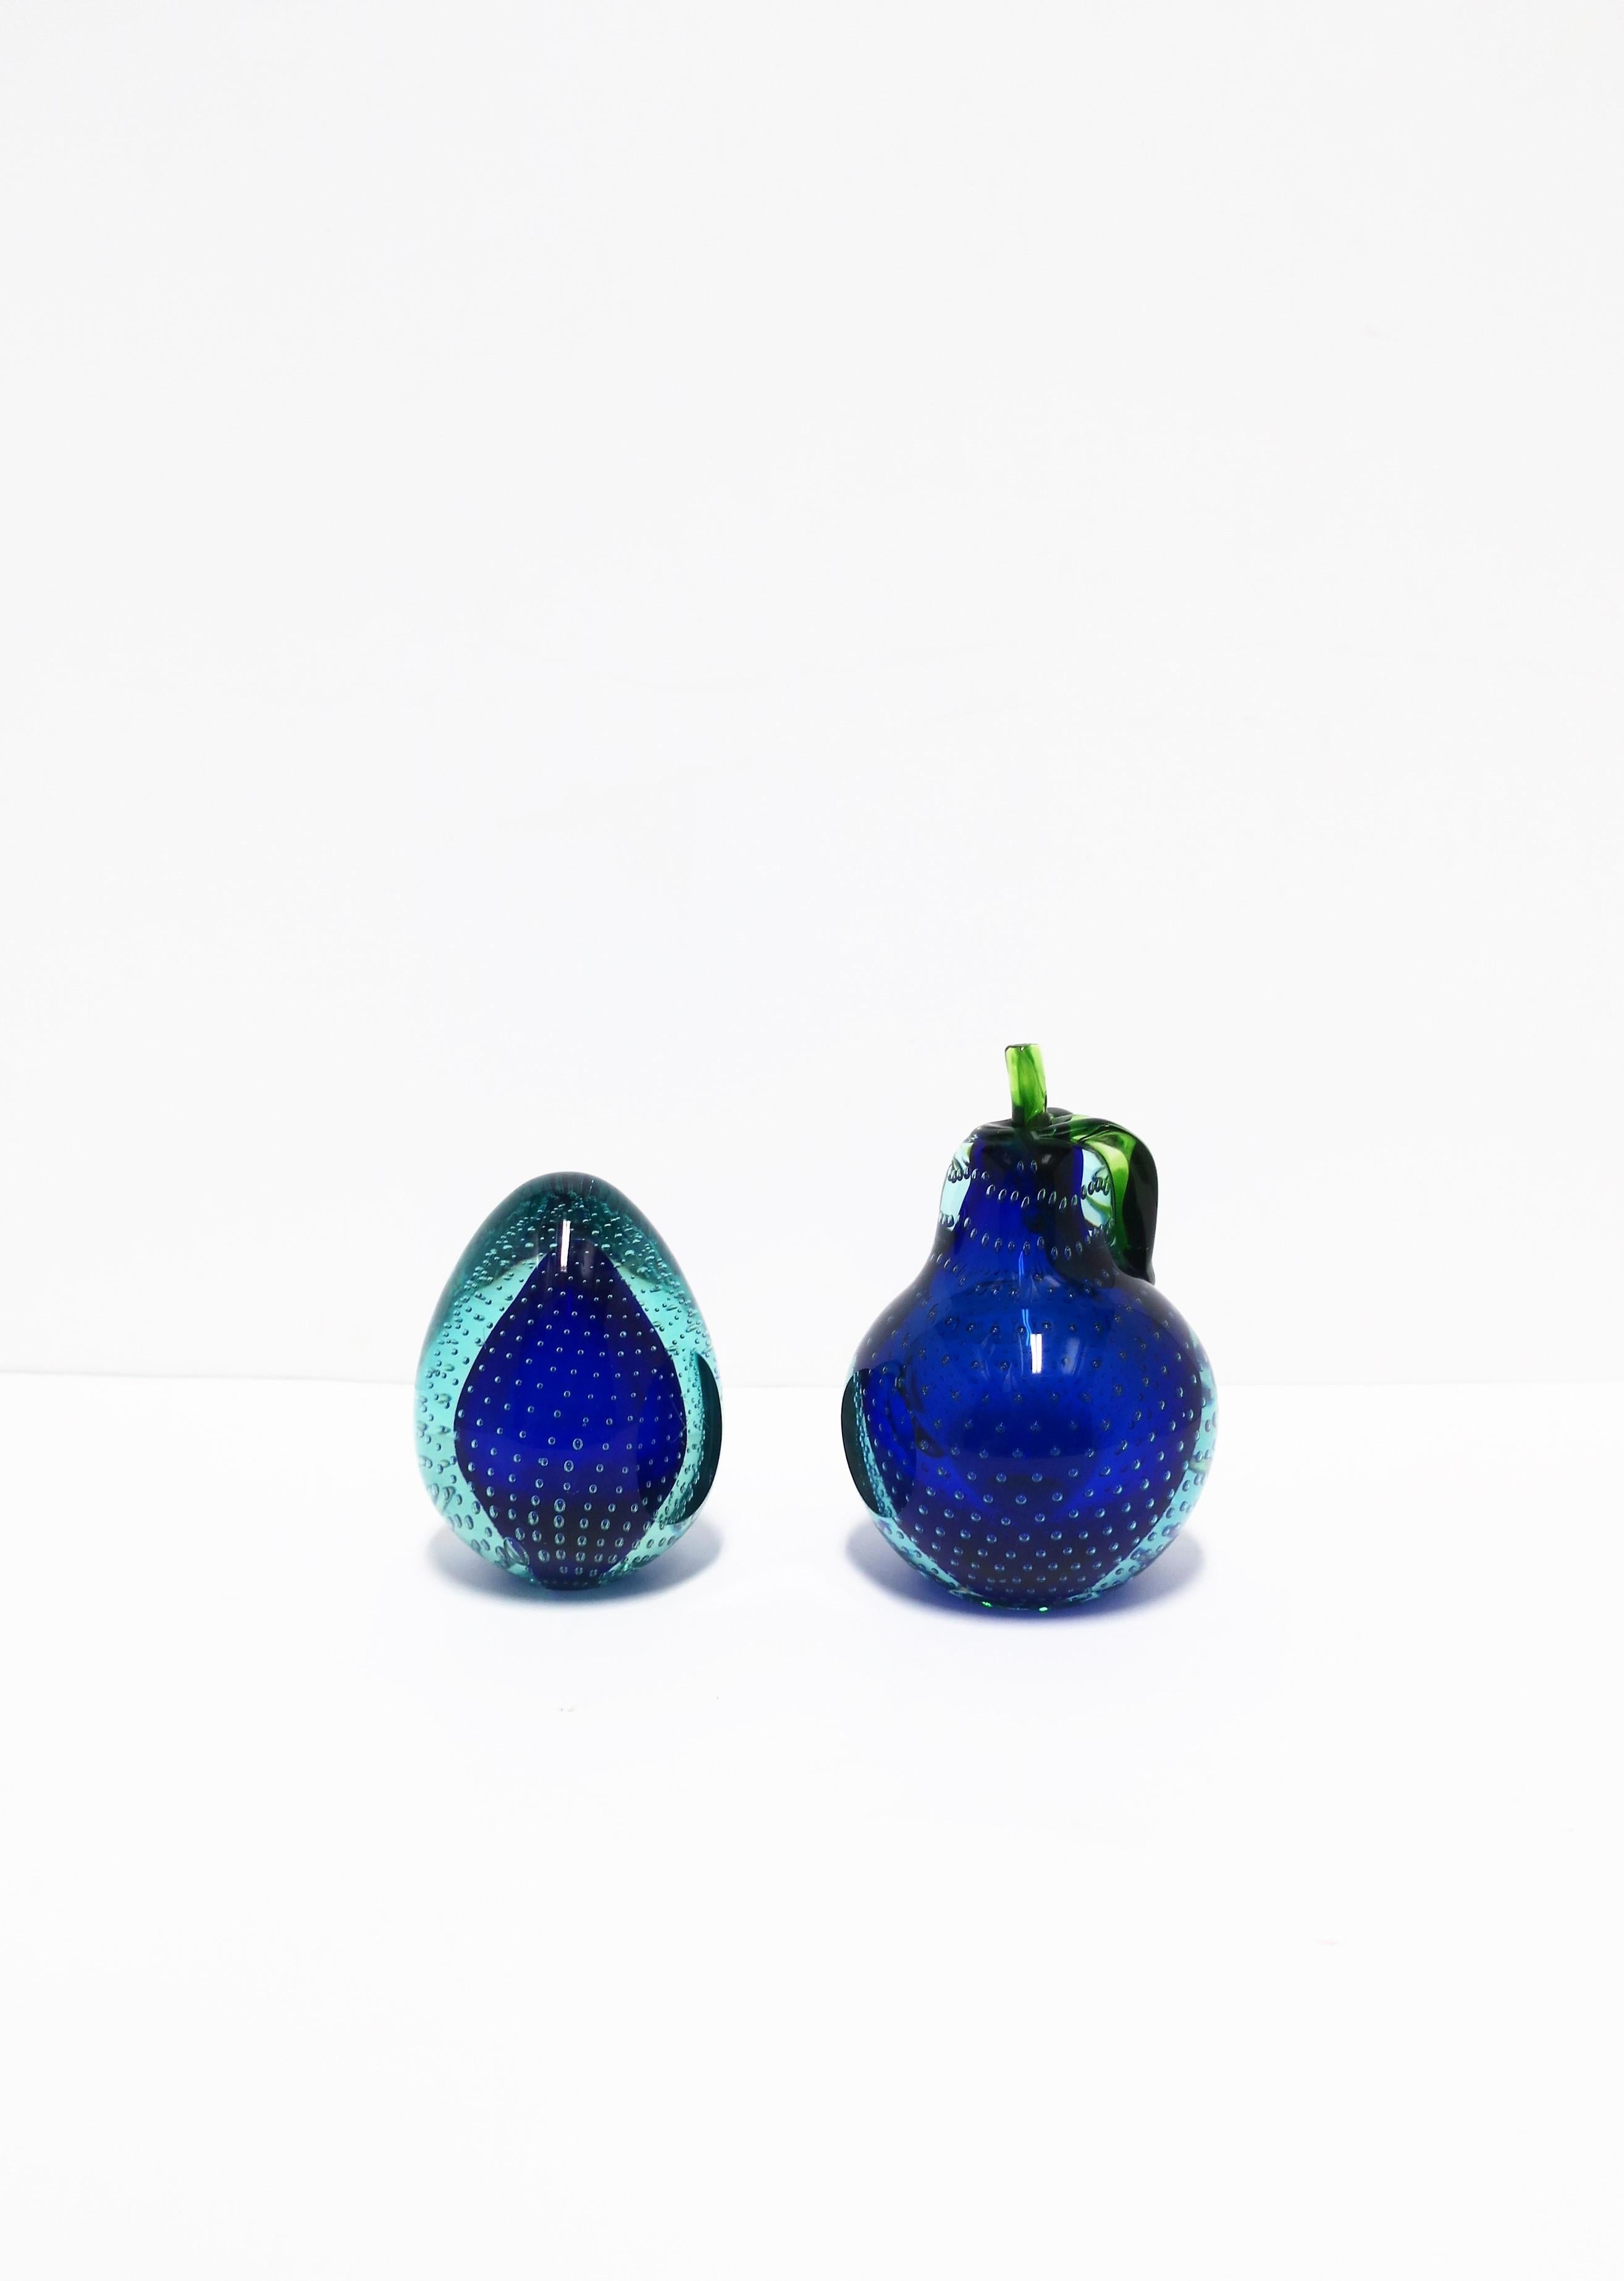 20th Century Italian Murano Blue Art Glass Pear Fruit Decorative Objects or Bookends For Sale